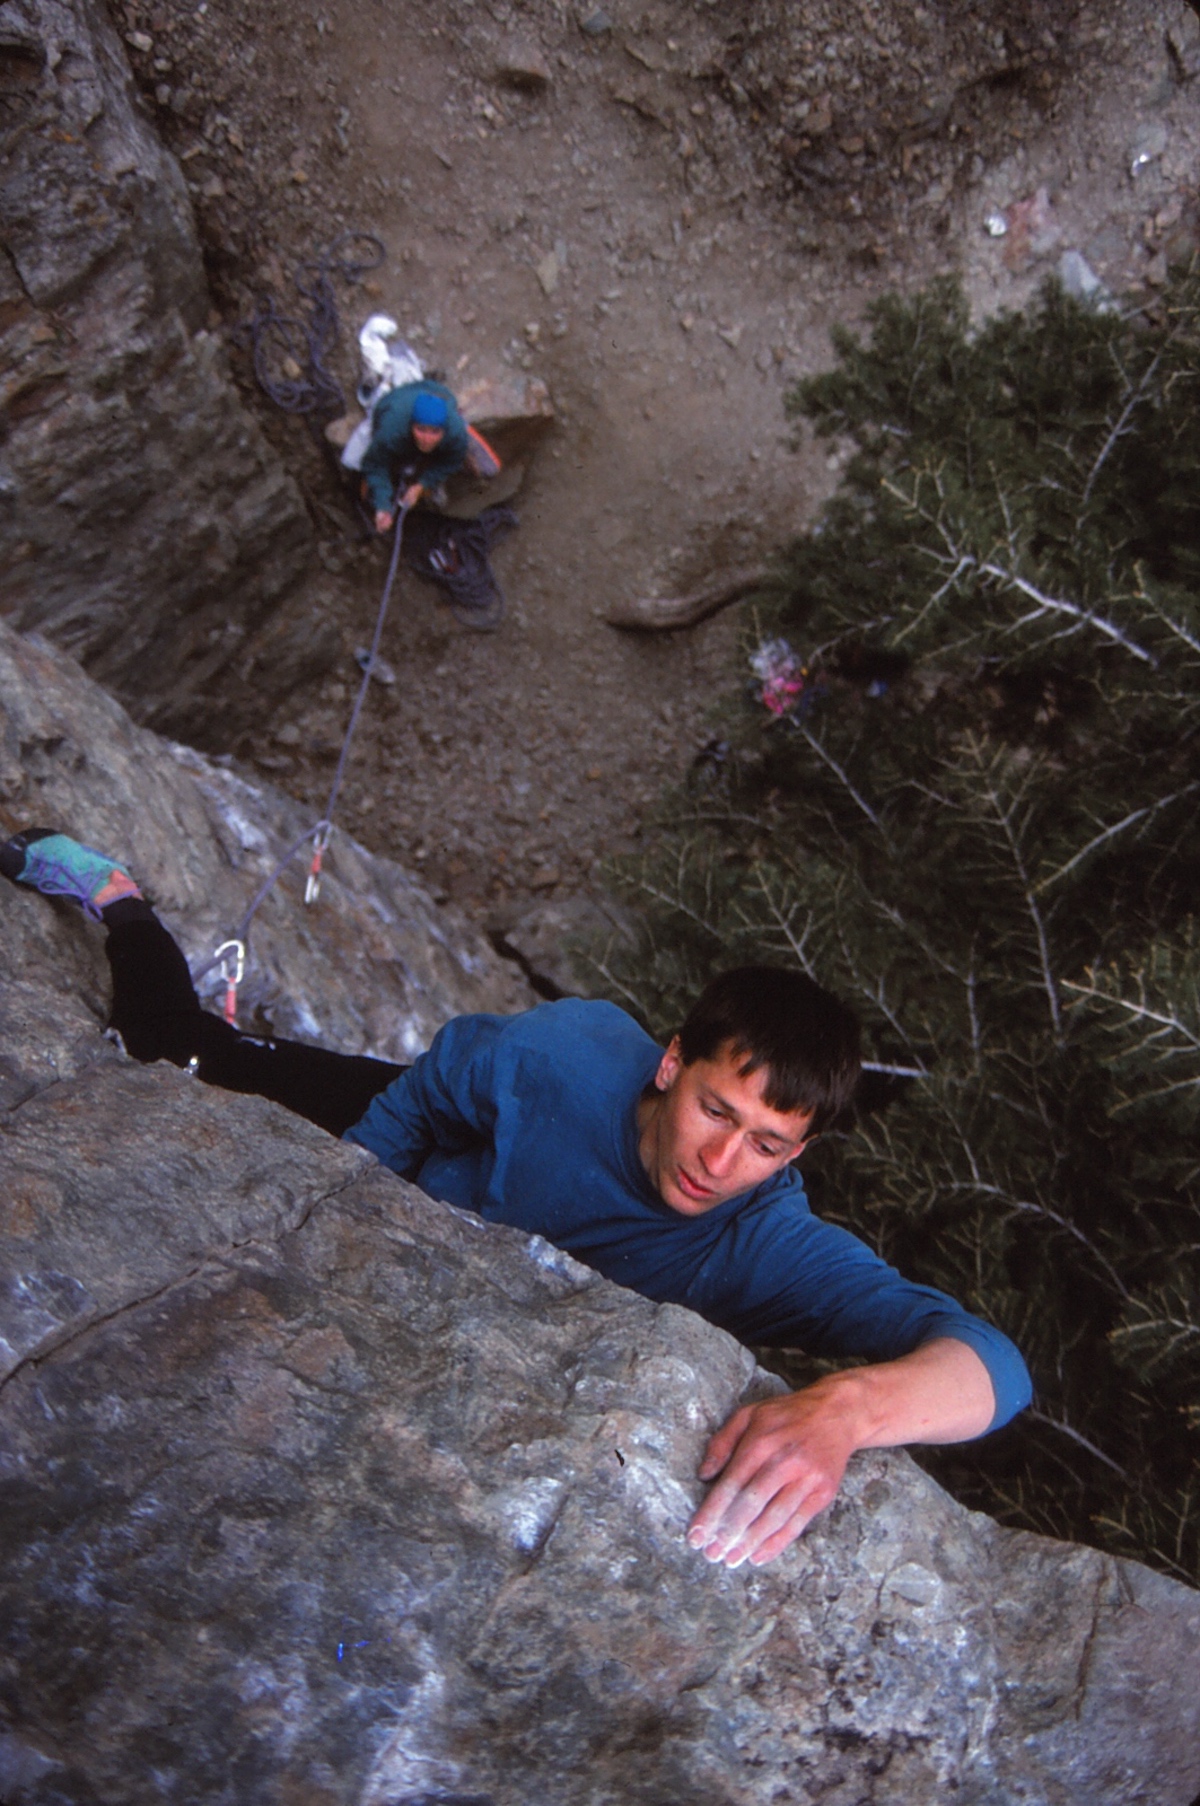 Dave Hayes on Big in Japan (5.12a) in Big Cottonwood Canyon, Utah, ca. late 1980s-early '90s. [Photo] Cameron M. Burns